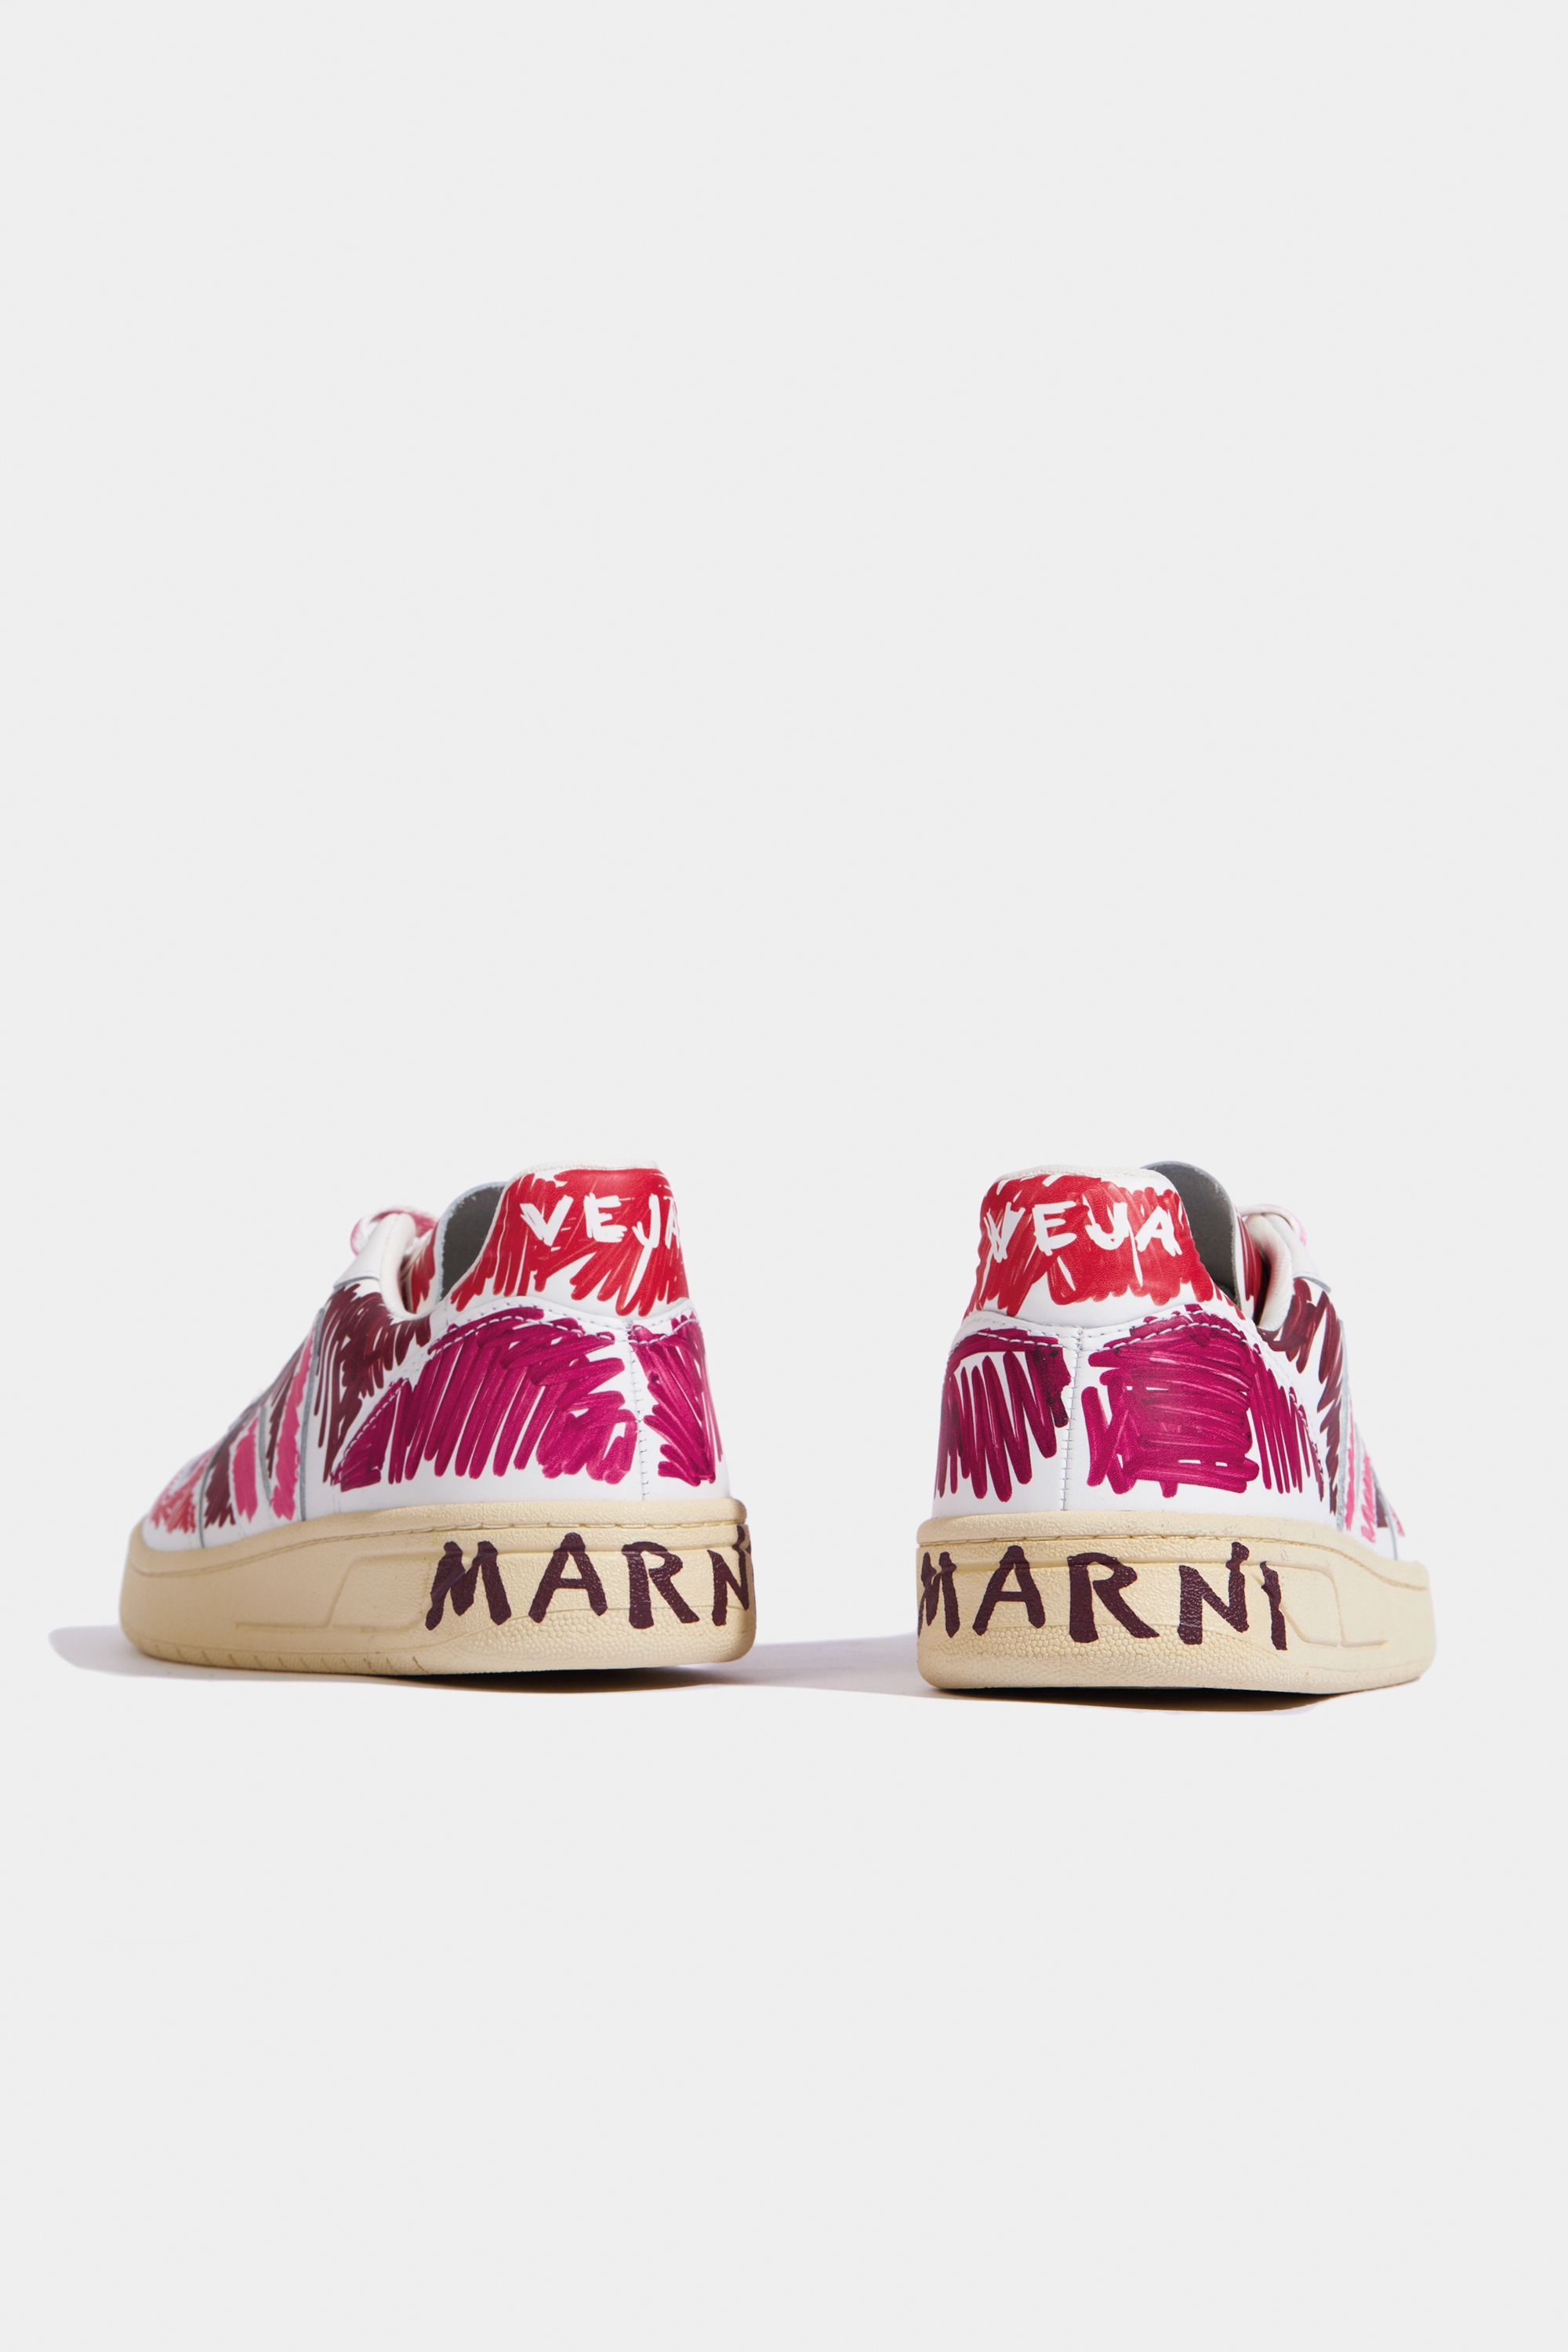 VEJA x Marni Sneaker Collaboration - An Exclusive Look at VEJA x Marni